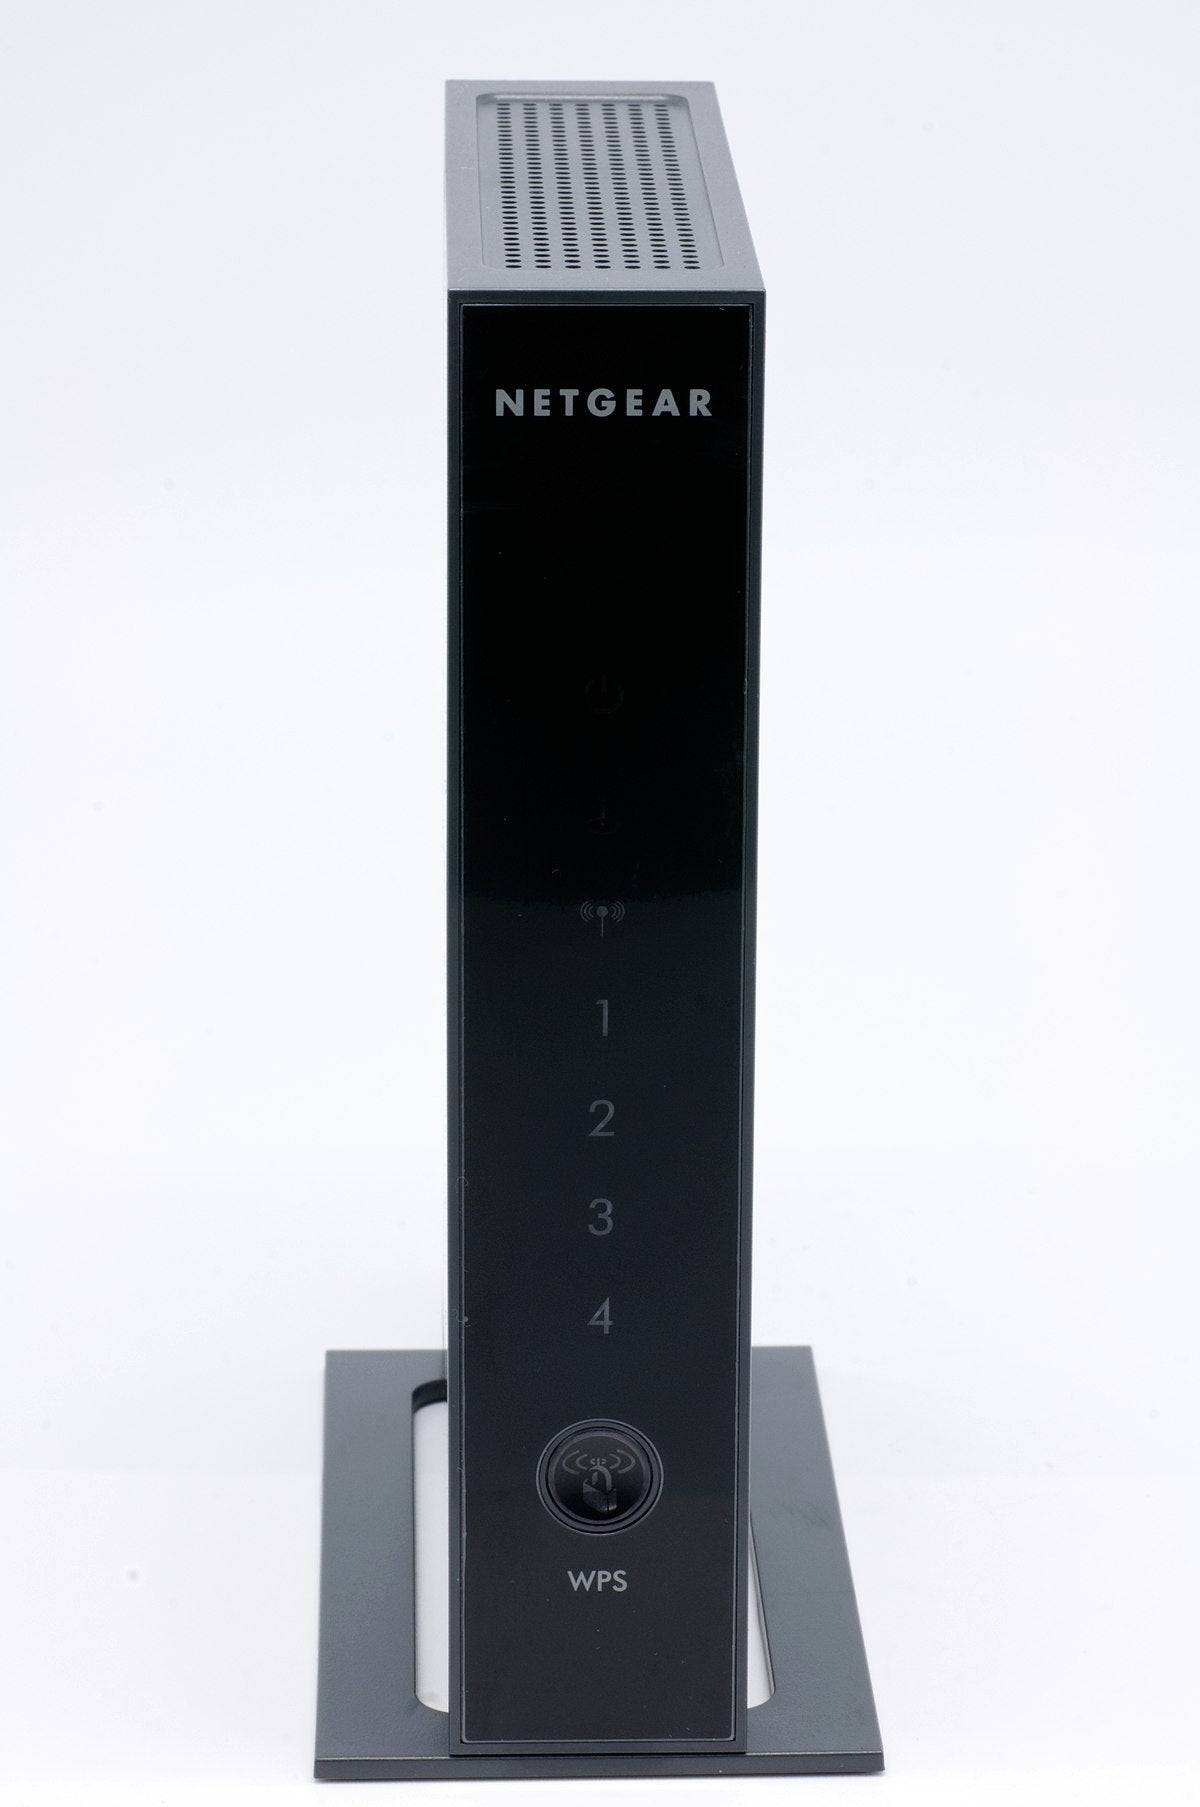 4K UHD P2P WiFi Functional Netgear Wireless Router View  Security Camera